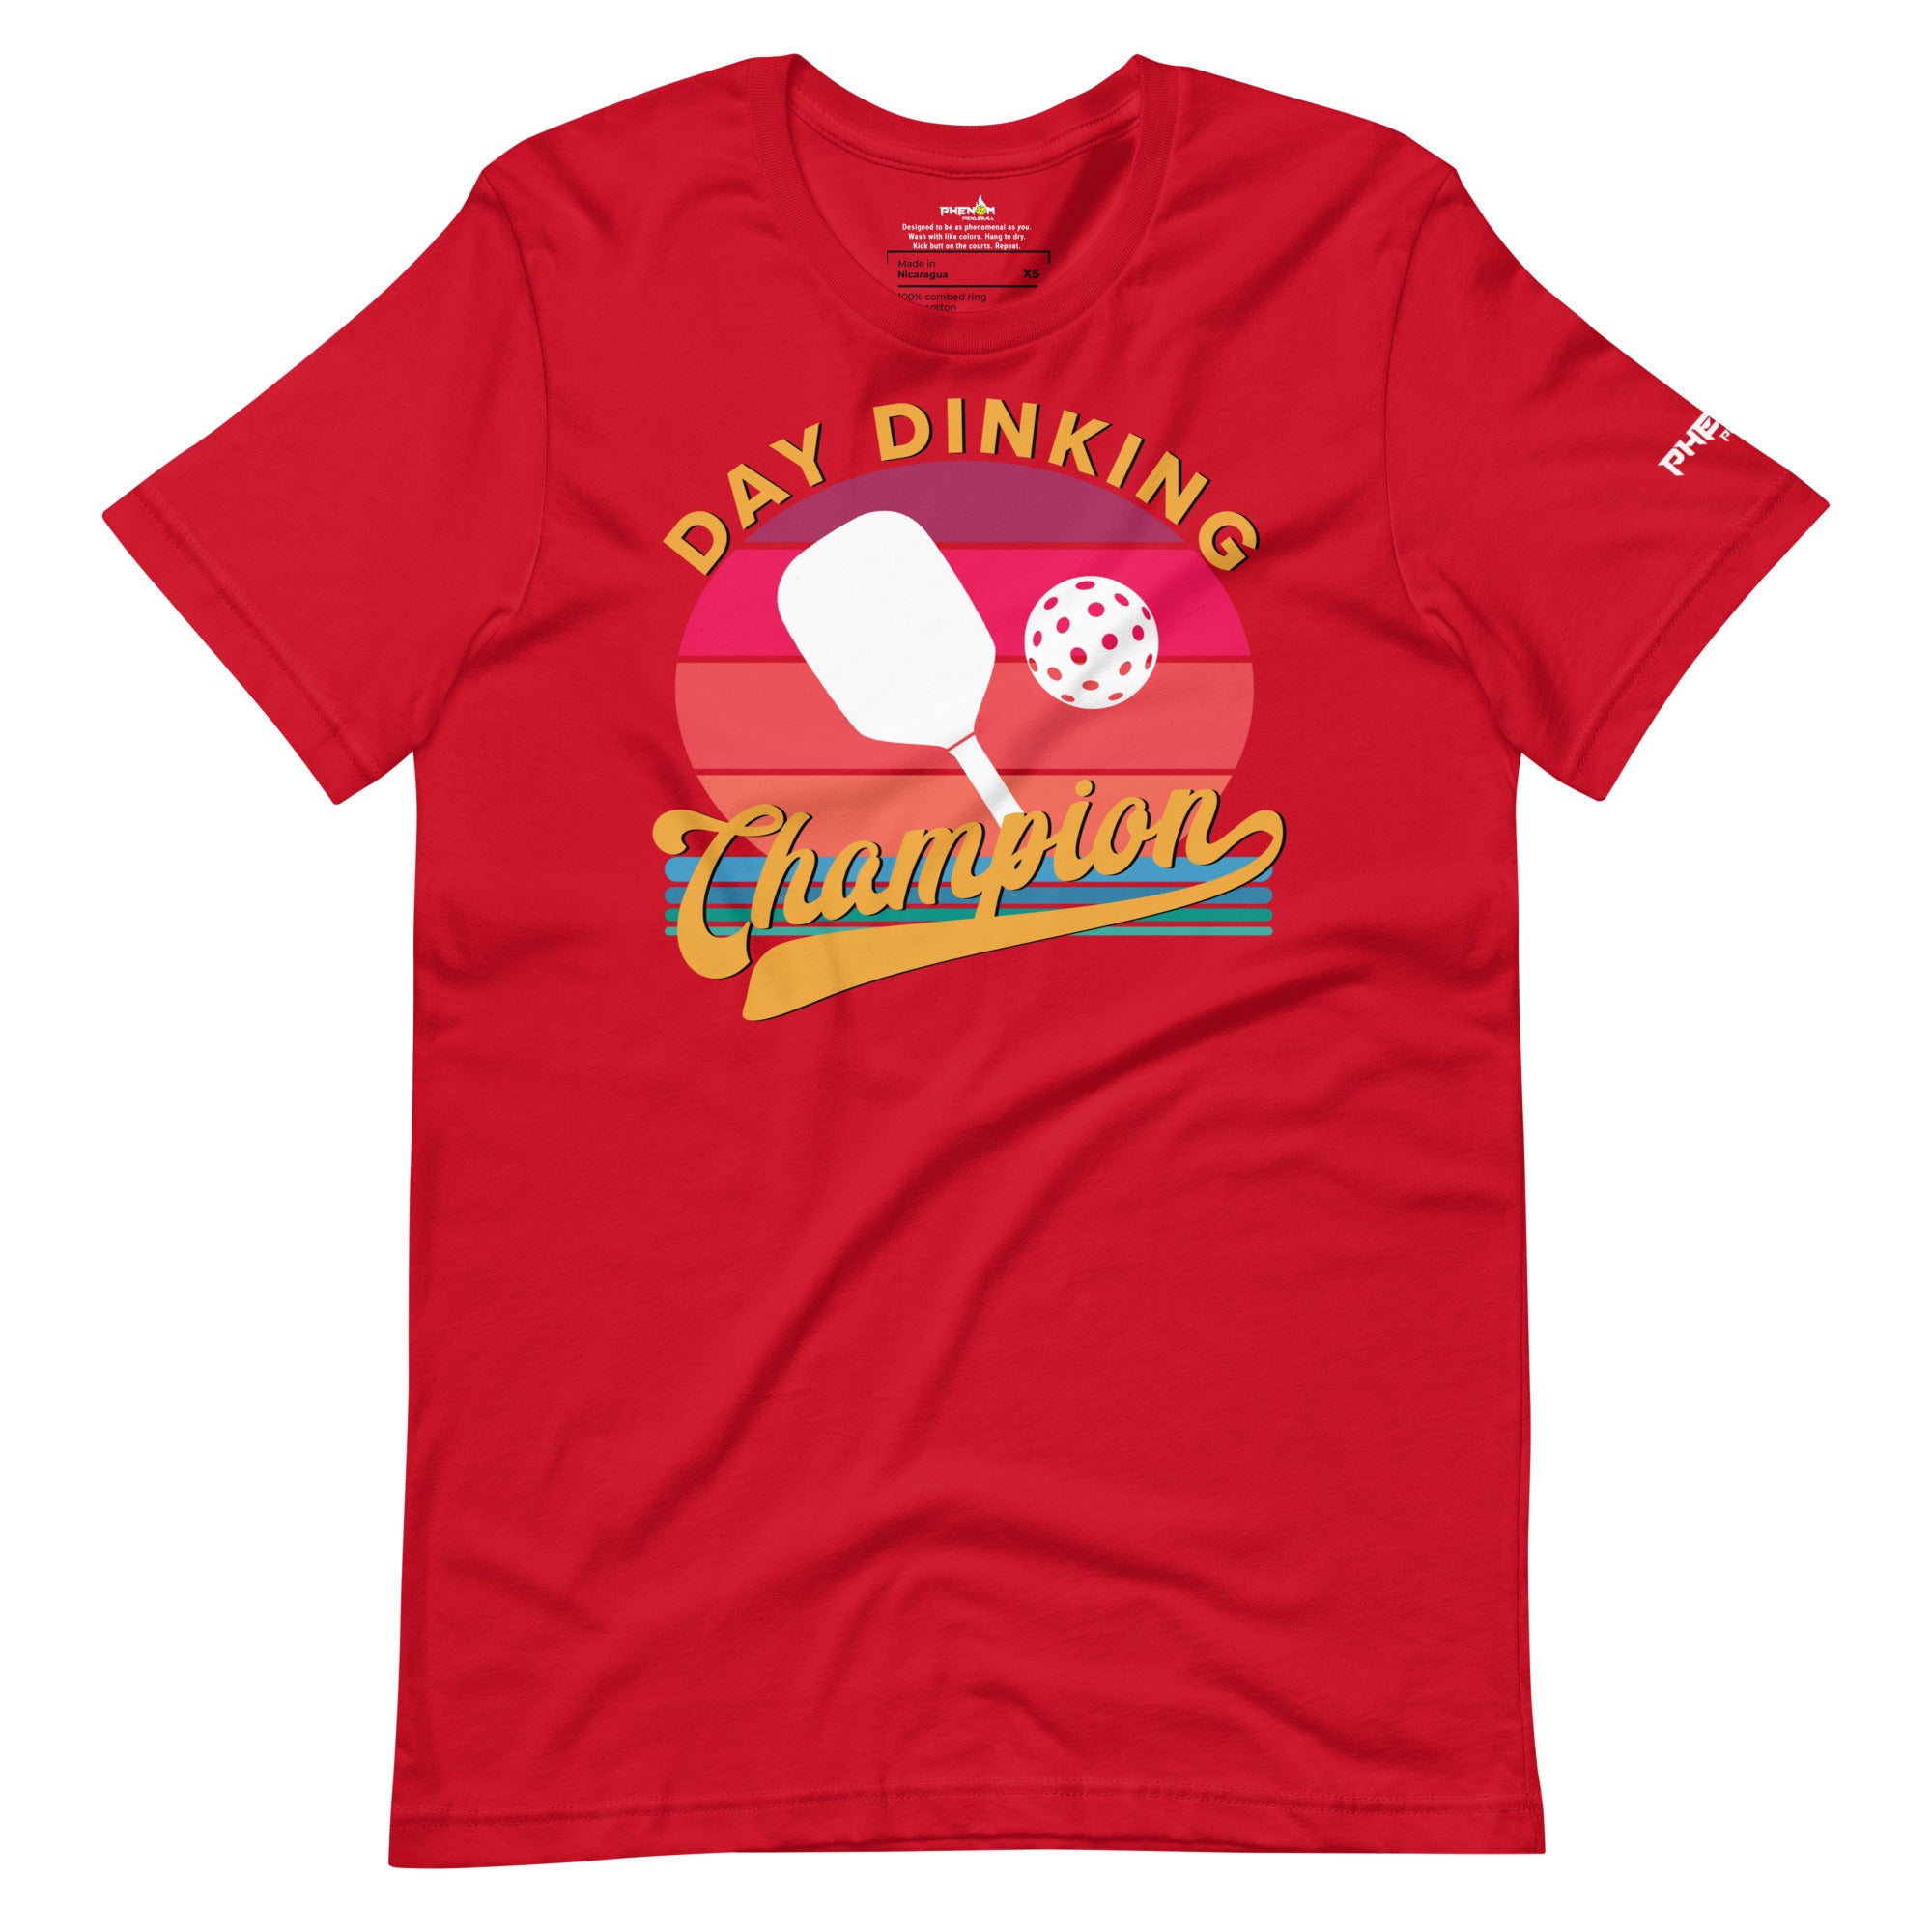 red day dinking champion retro inspired pickleball shirt apparel front view